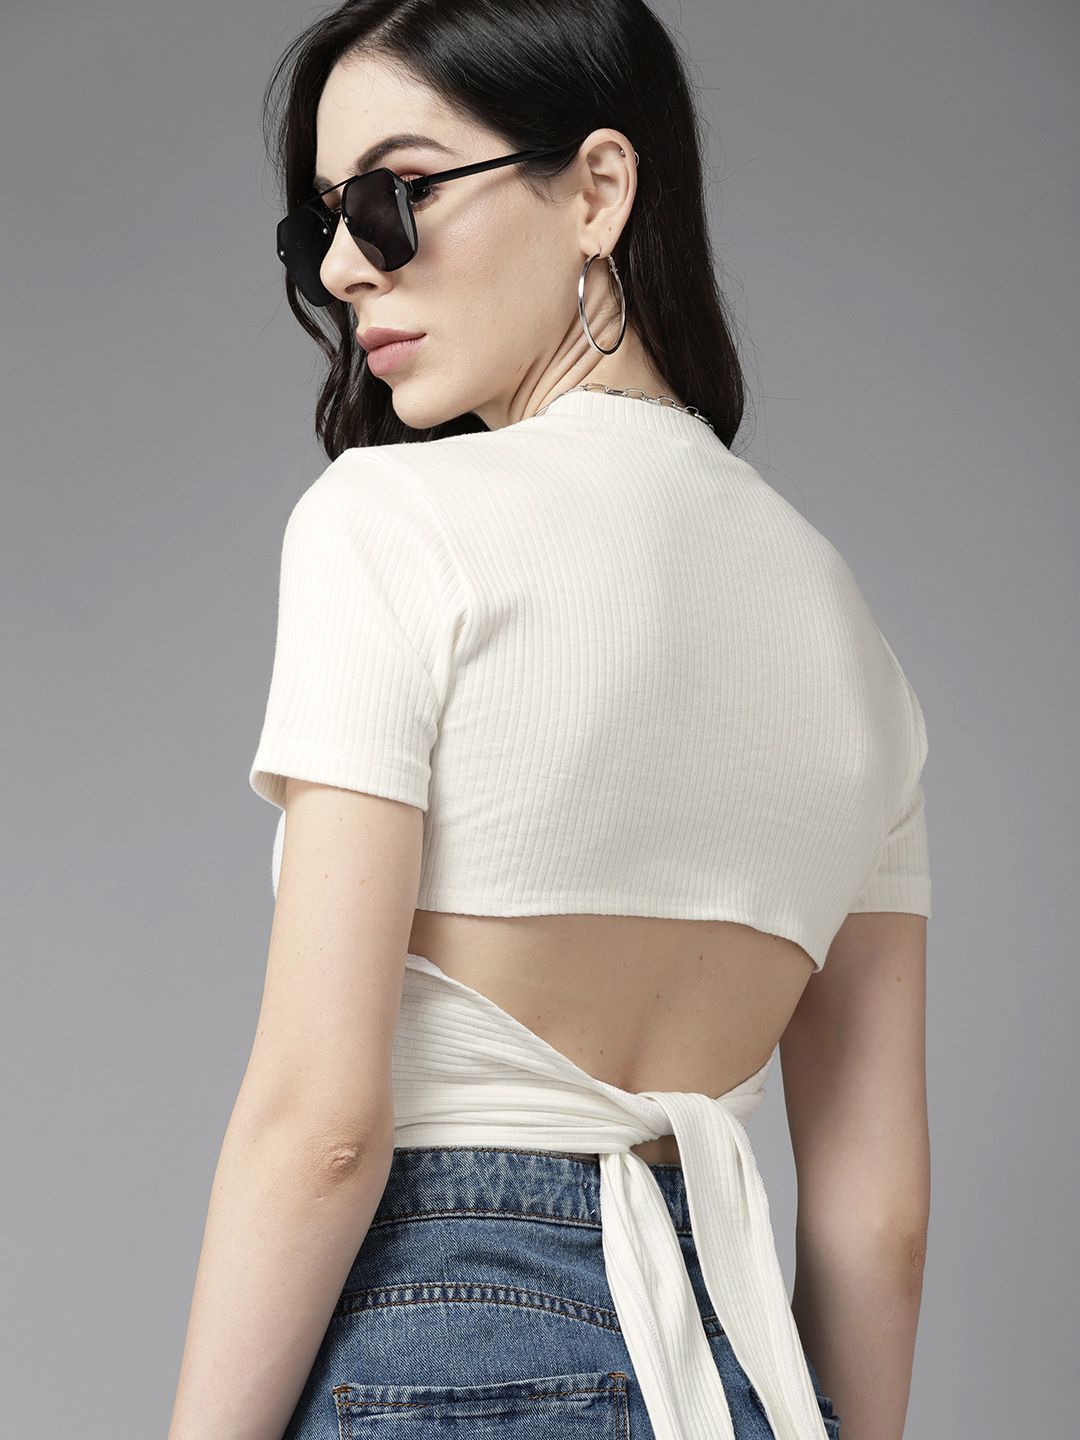 Roadster White Styled Back Crop Top Price in India